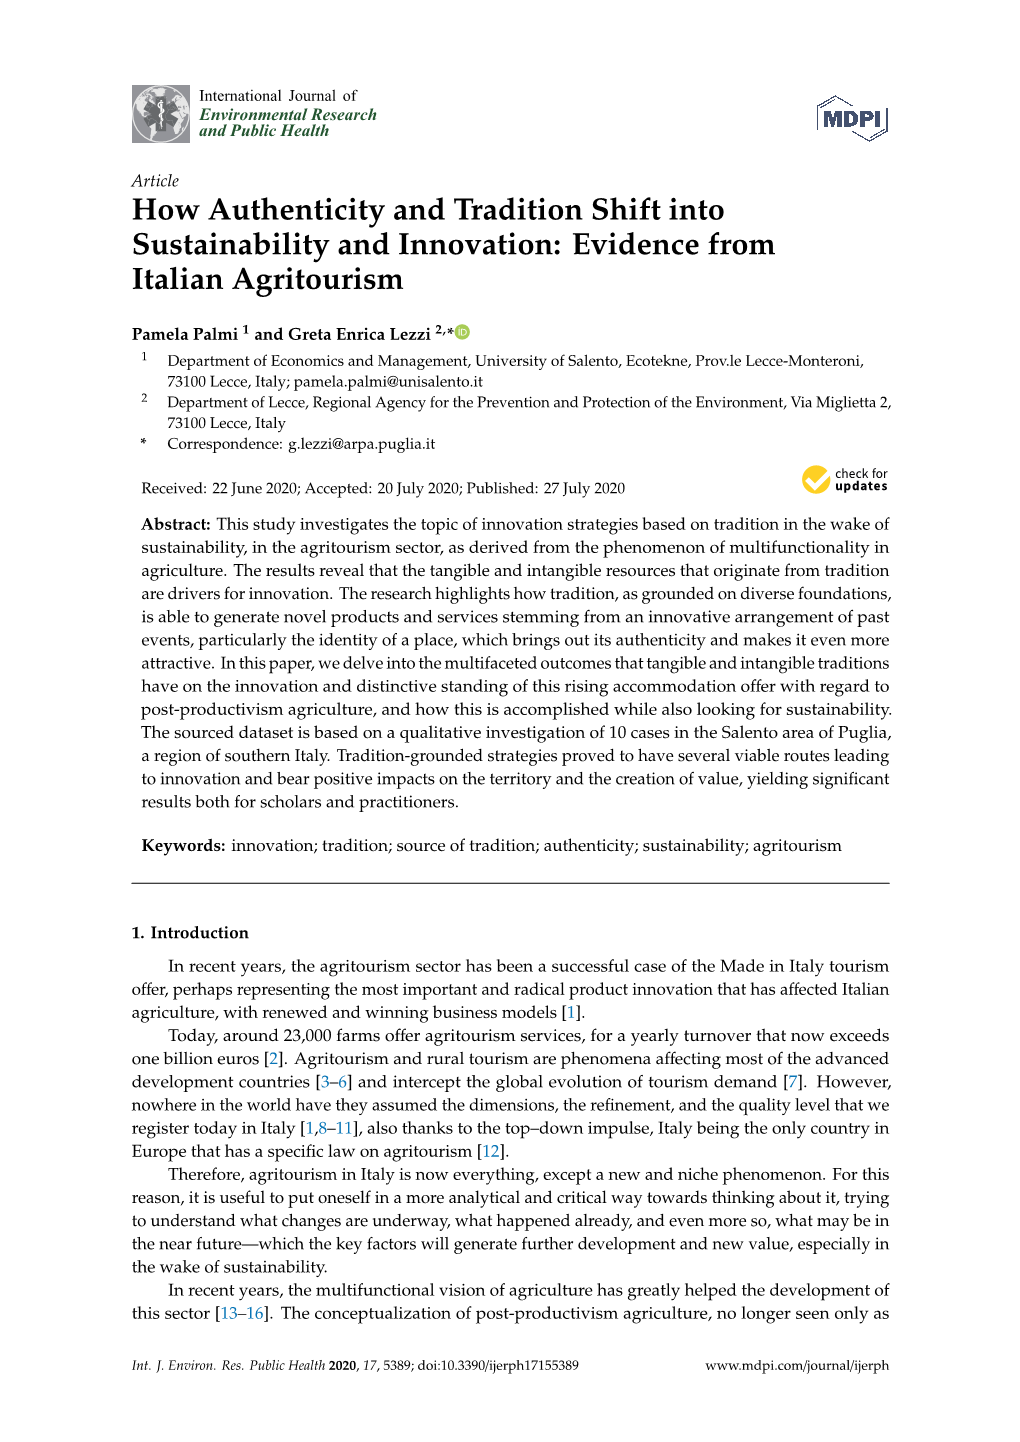 How Authenticity and Tradition Shift Into Sustainability and Innovation: Evidence from Italian Agritourism